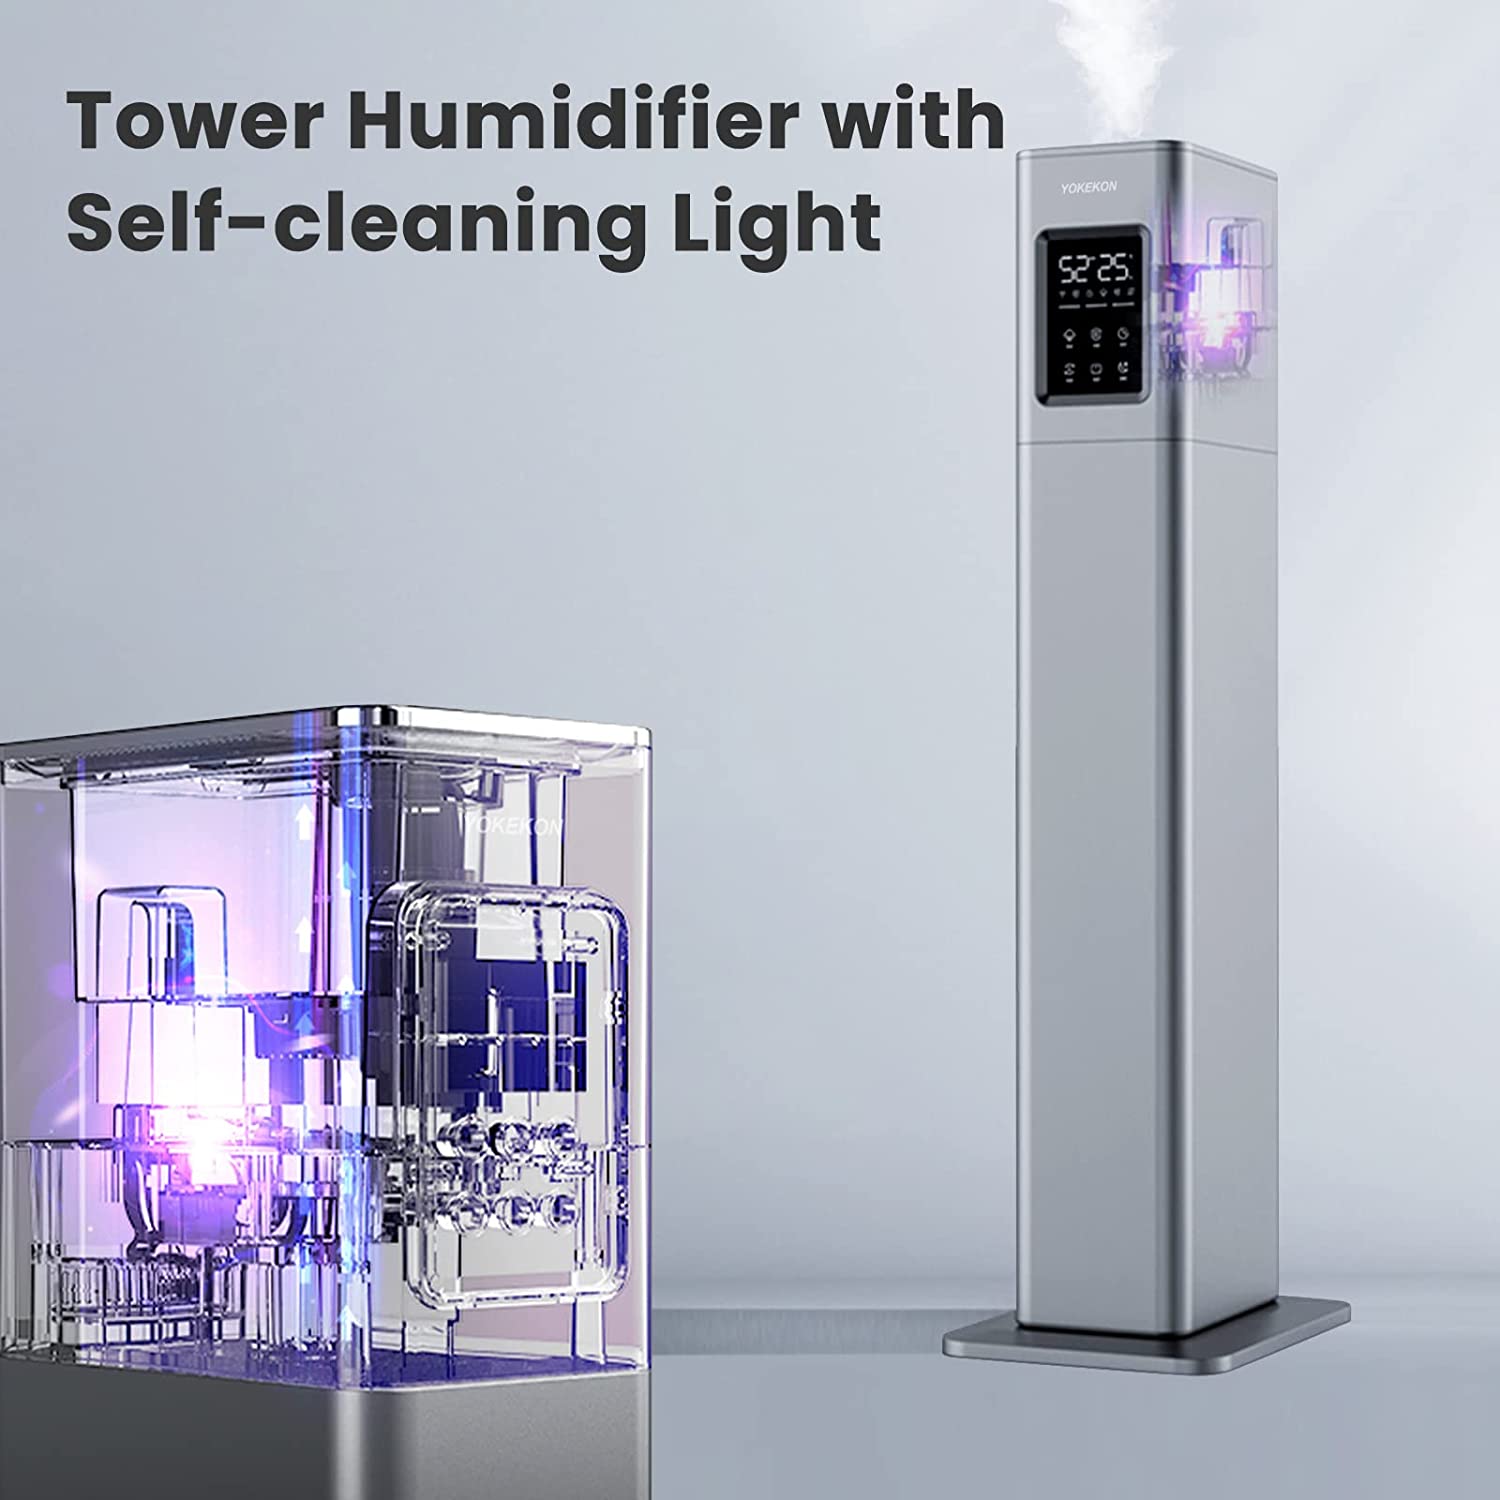 [MH-2101]Large Floor Humidifiers for Bedroom Large Room, Cool Mist Humidifiers by 3.4Gal with 3 Mist Levels, Black